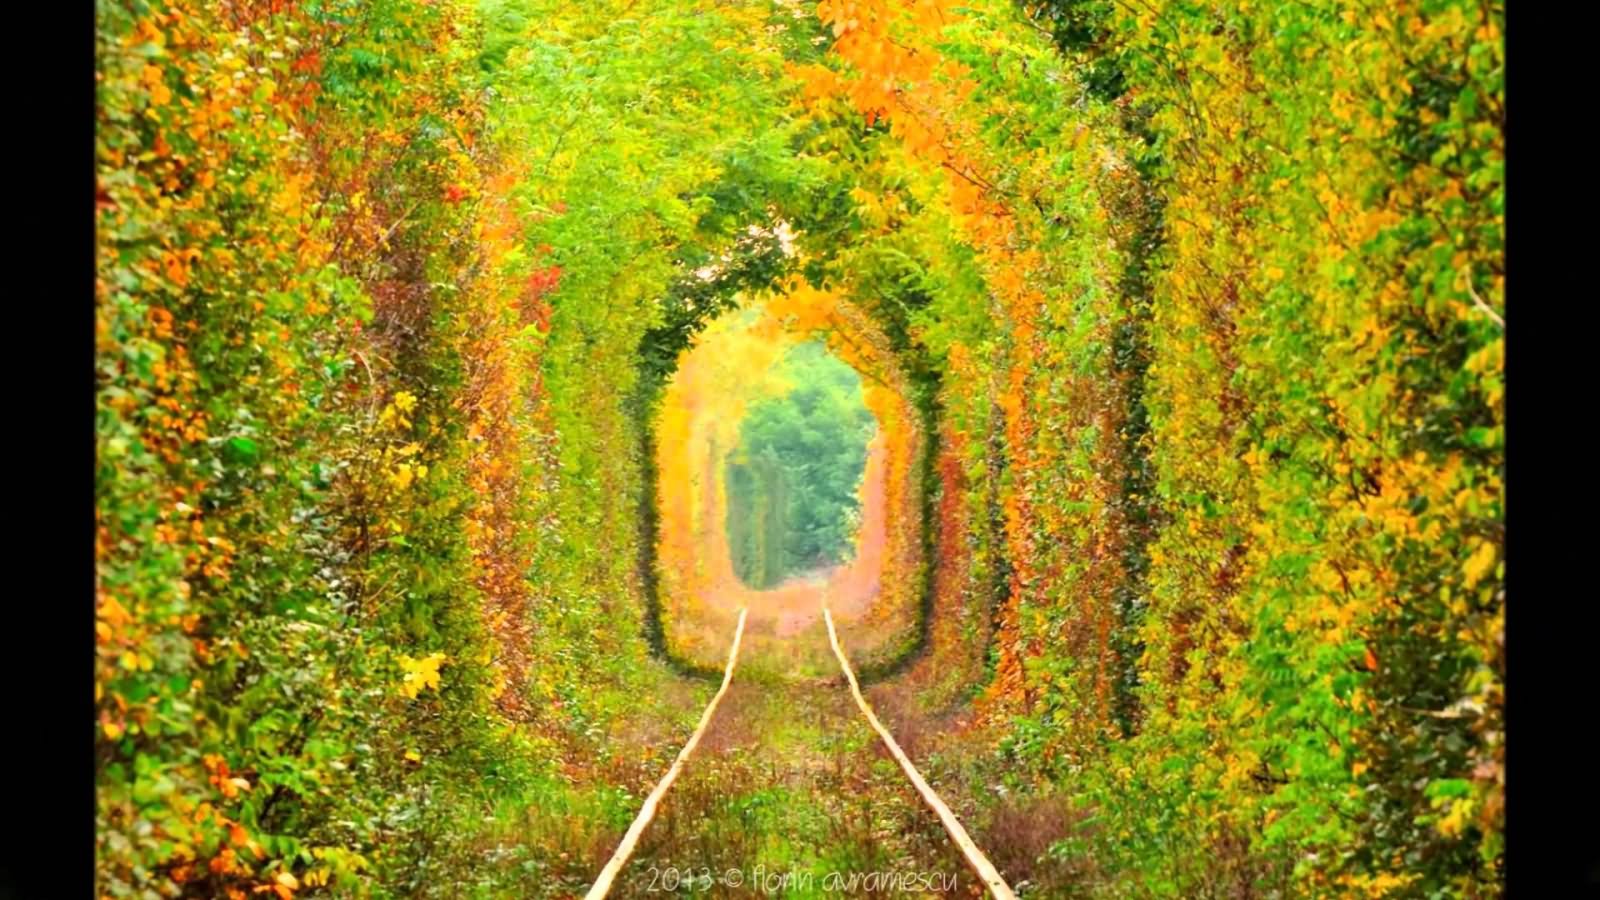 Stunning View Of The Tunnel Of Love During Autumn